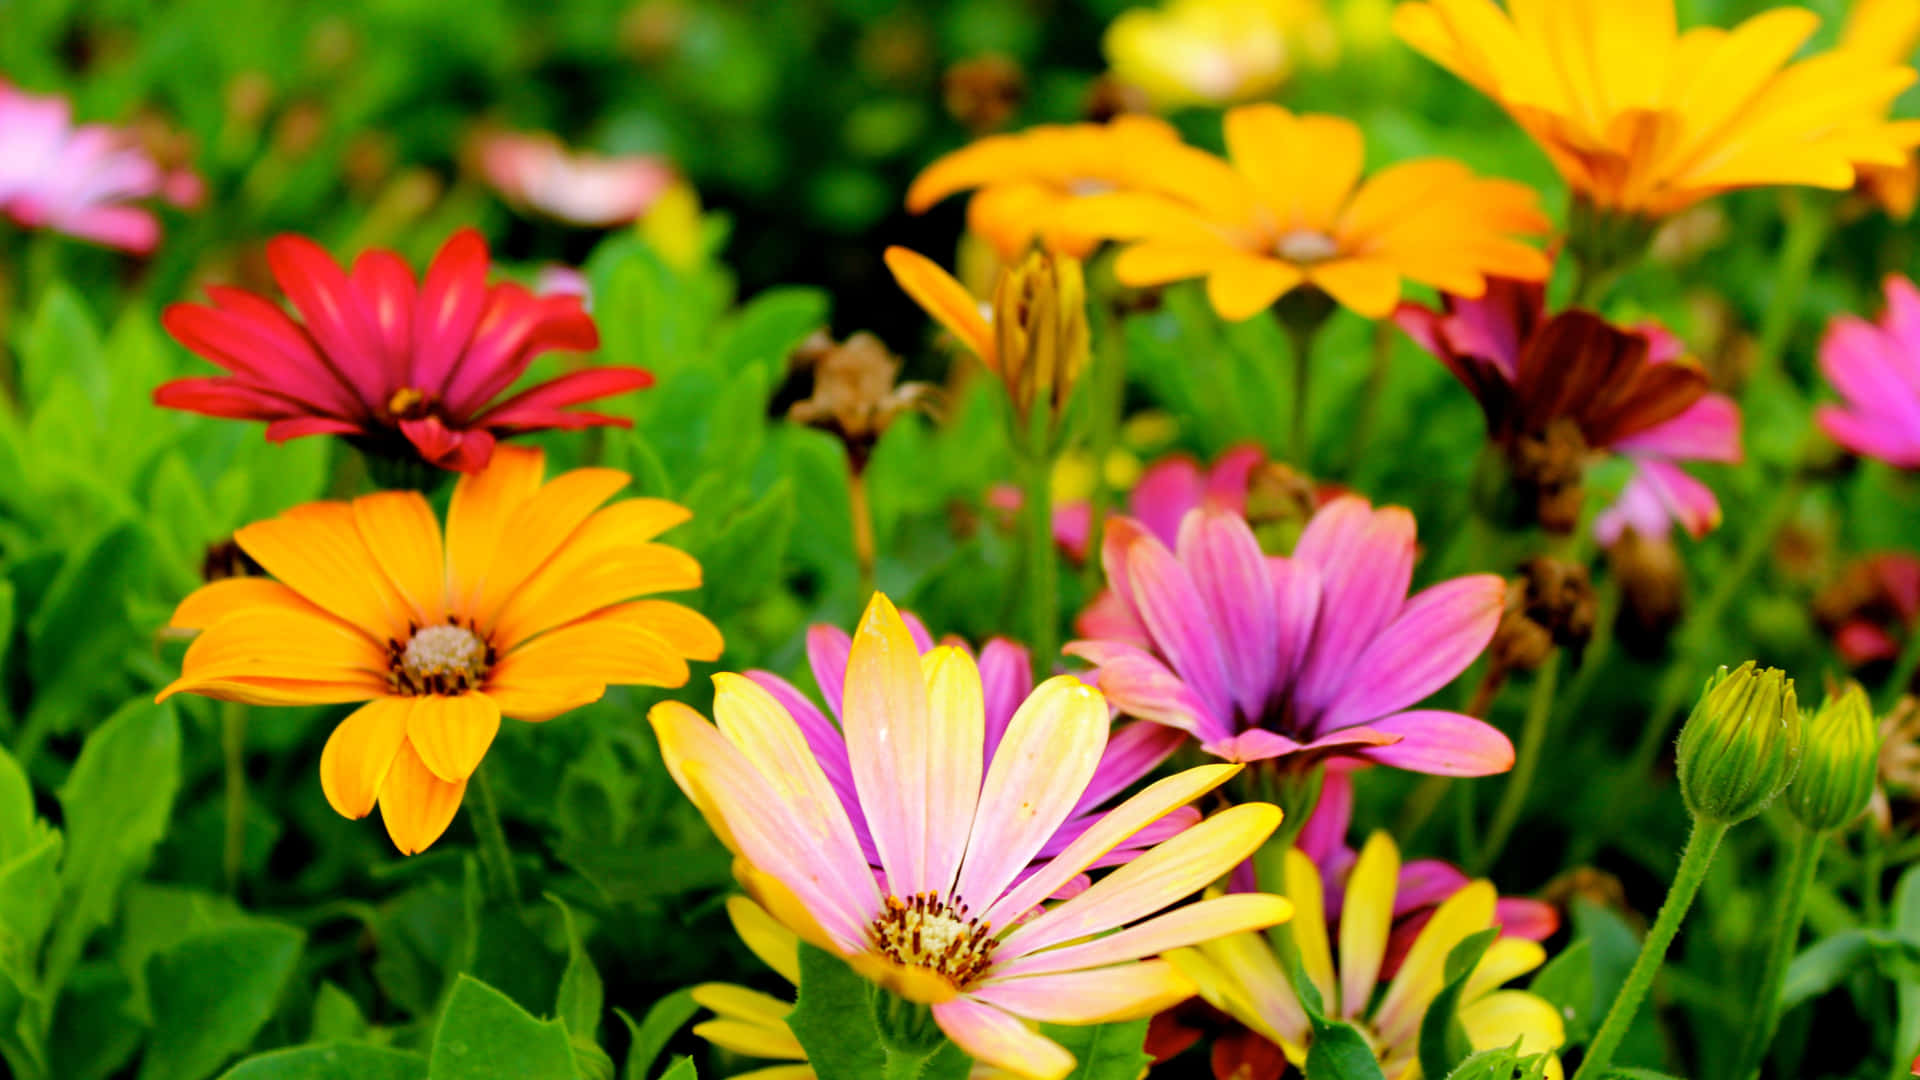 Brighten up the room with these oh-so-pretty colorful daisies! Wallpaper